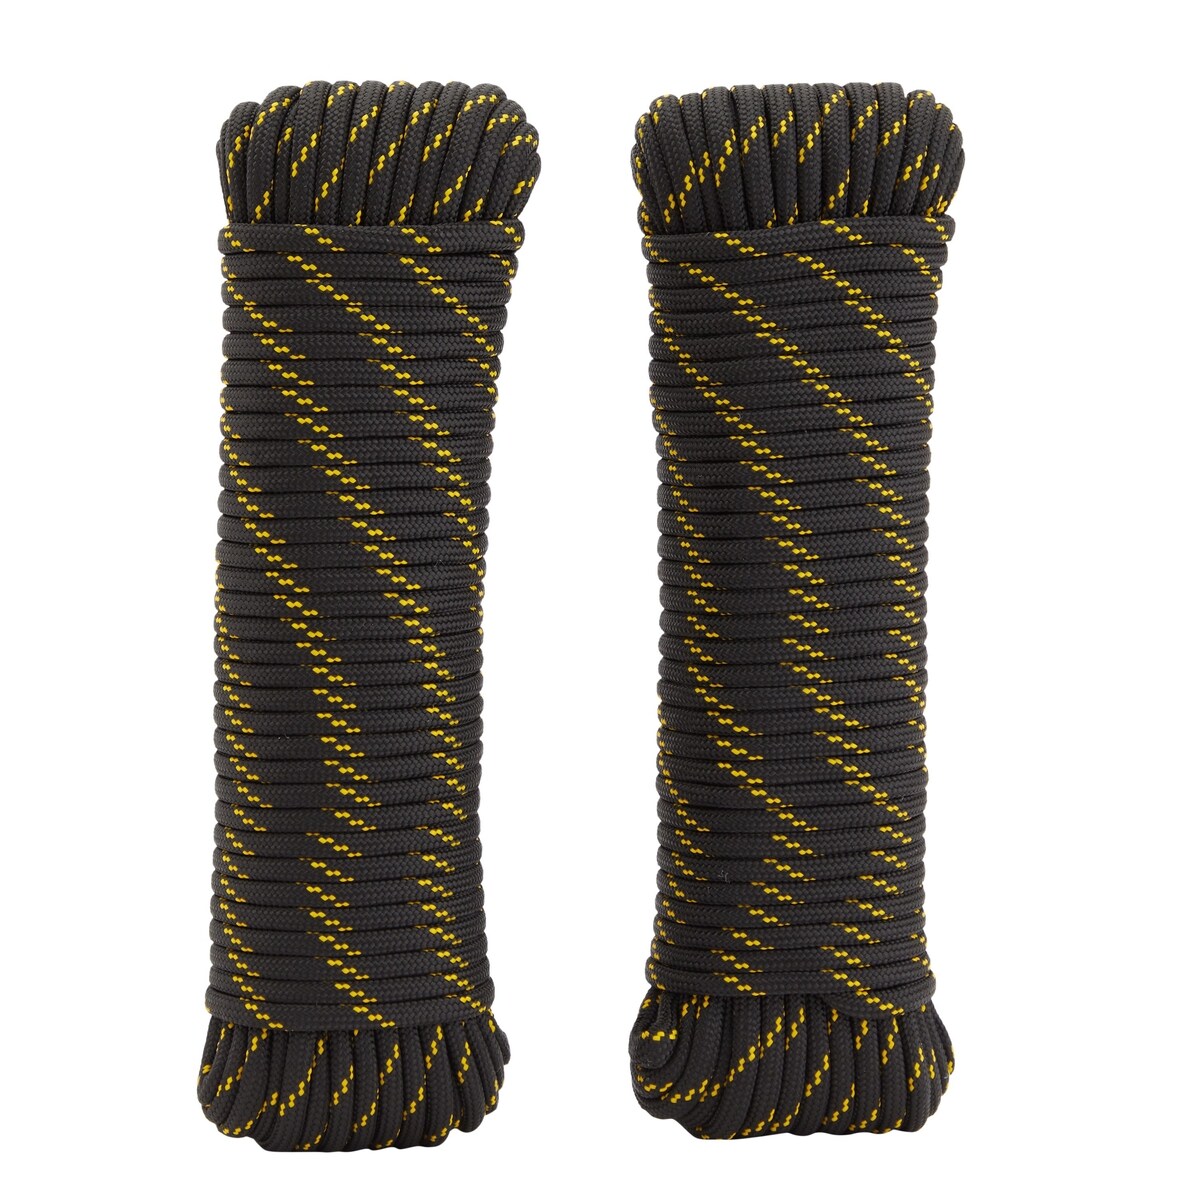 2 Pack 1/4 Inch x 100 Ft Braided Nylon Rope for Knot Tying